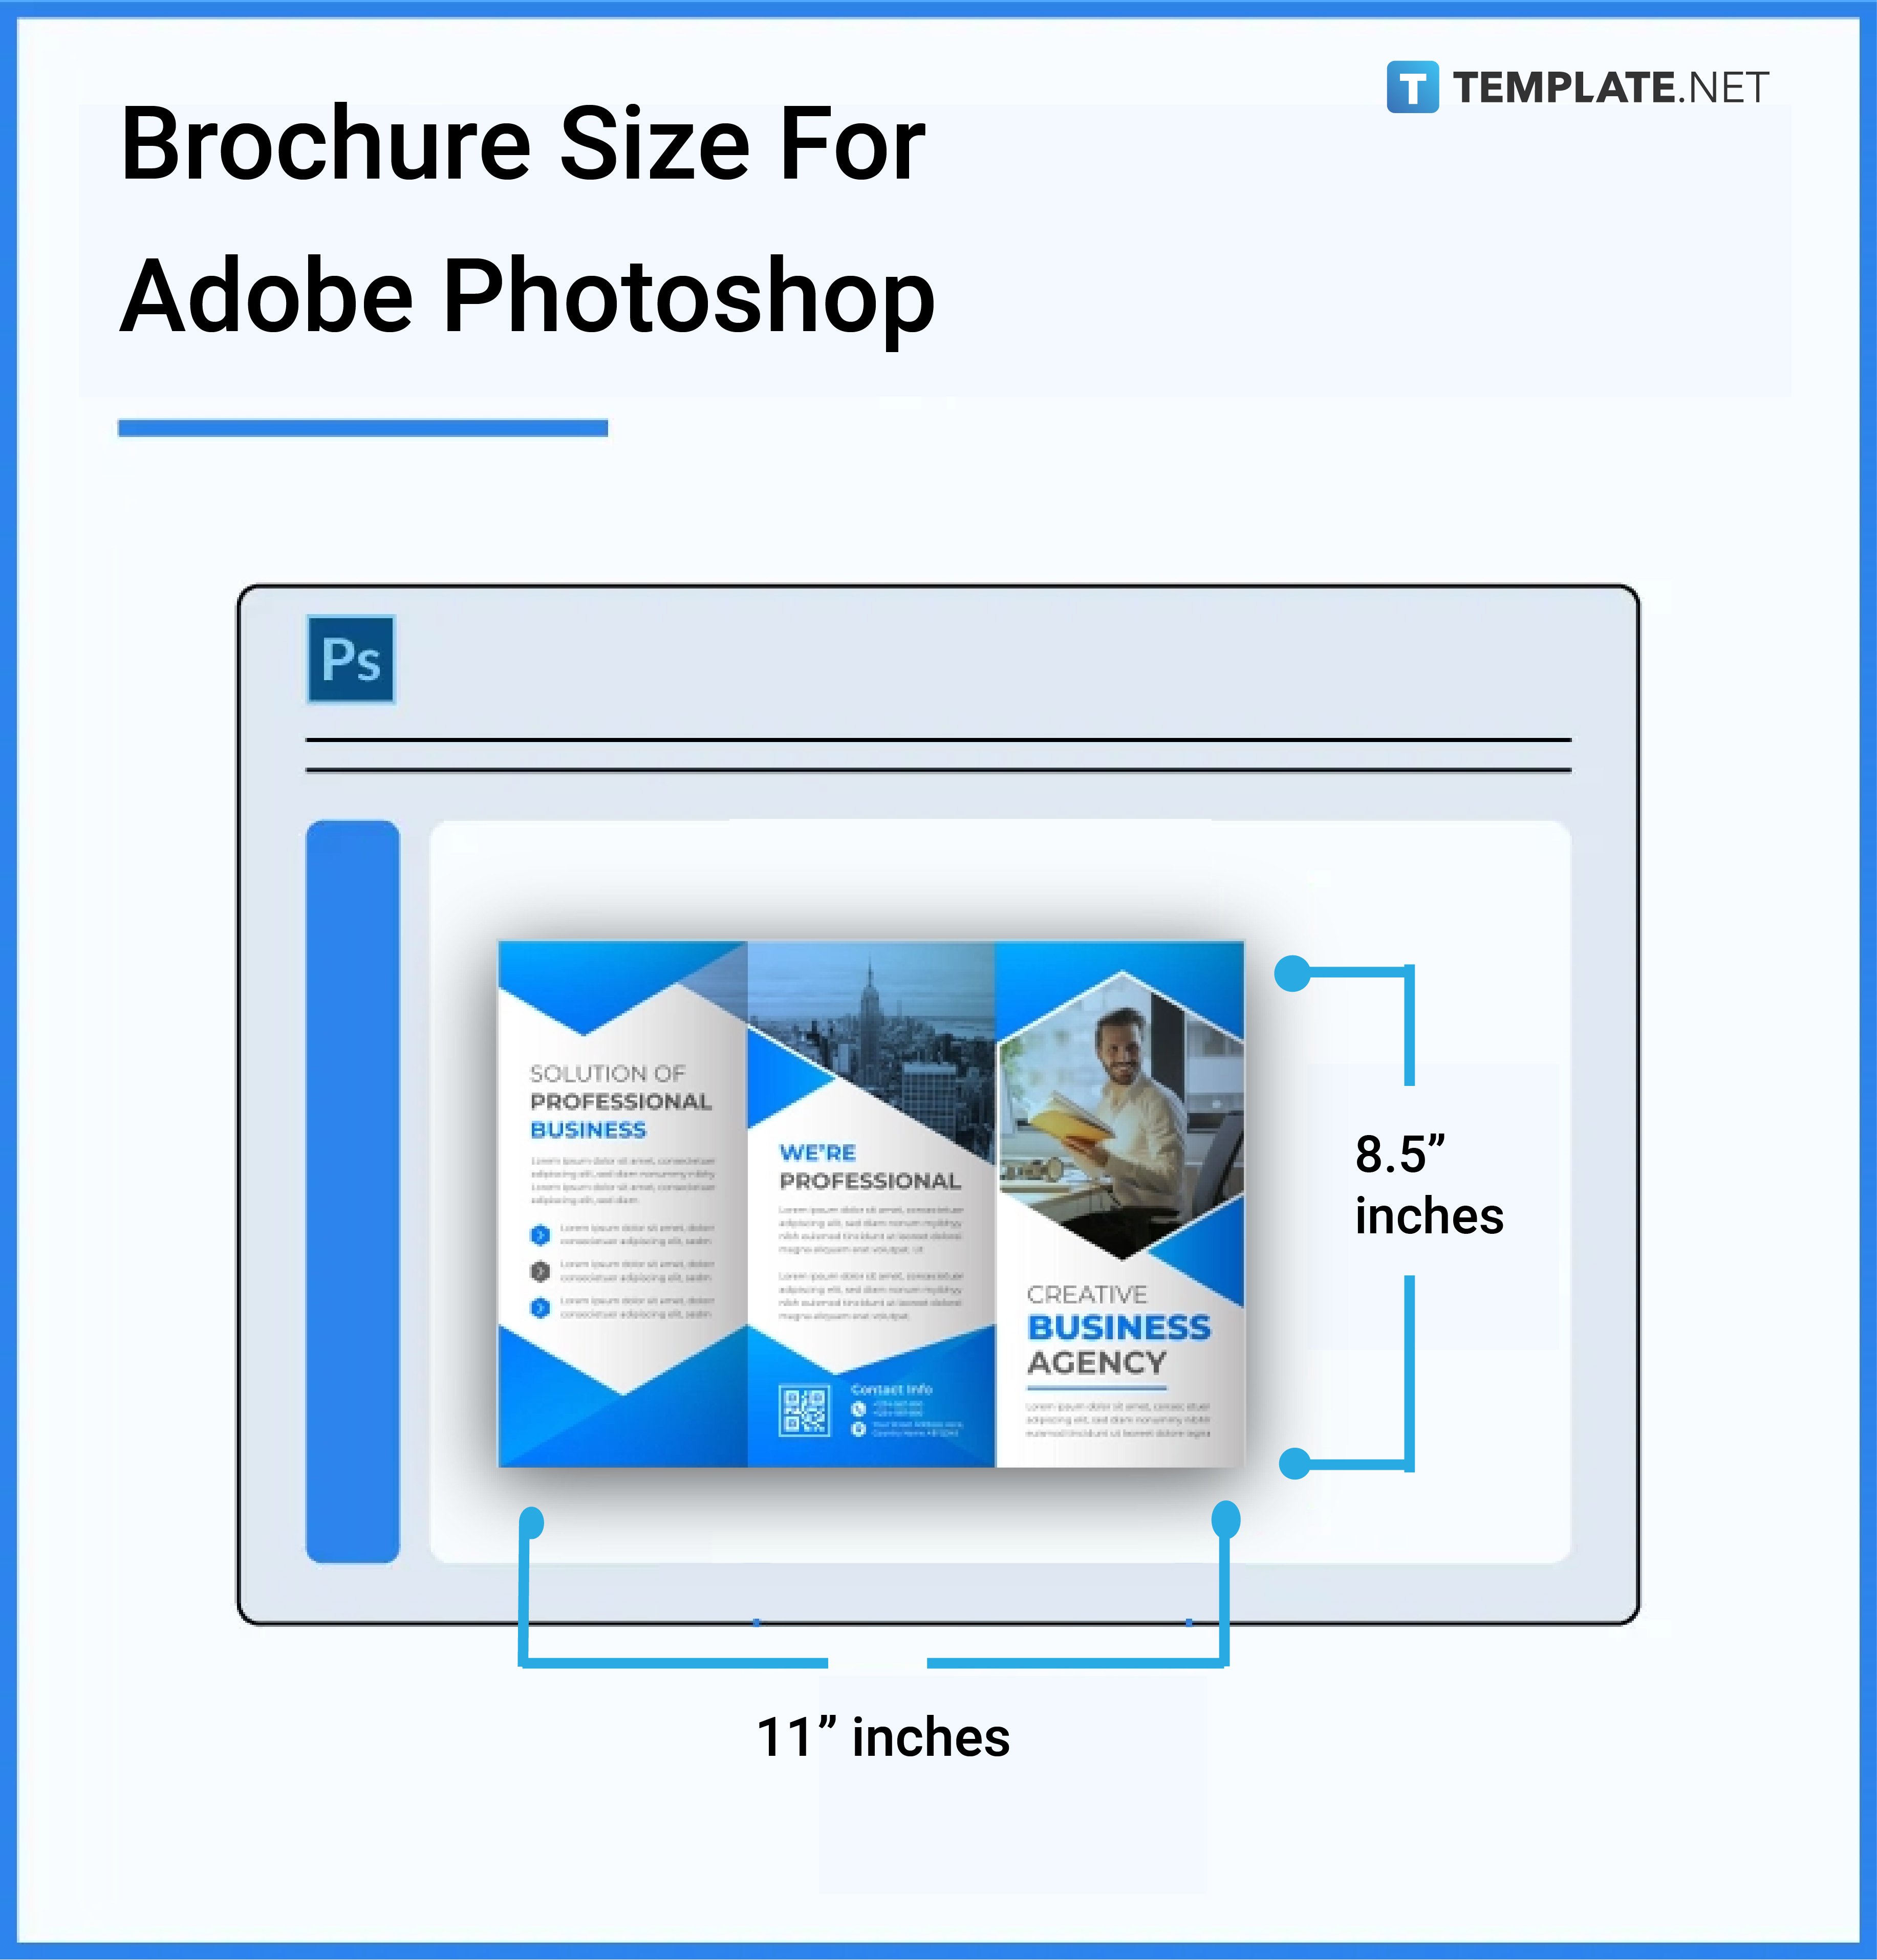 brochure-size-for-adobe-photoshop